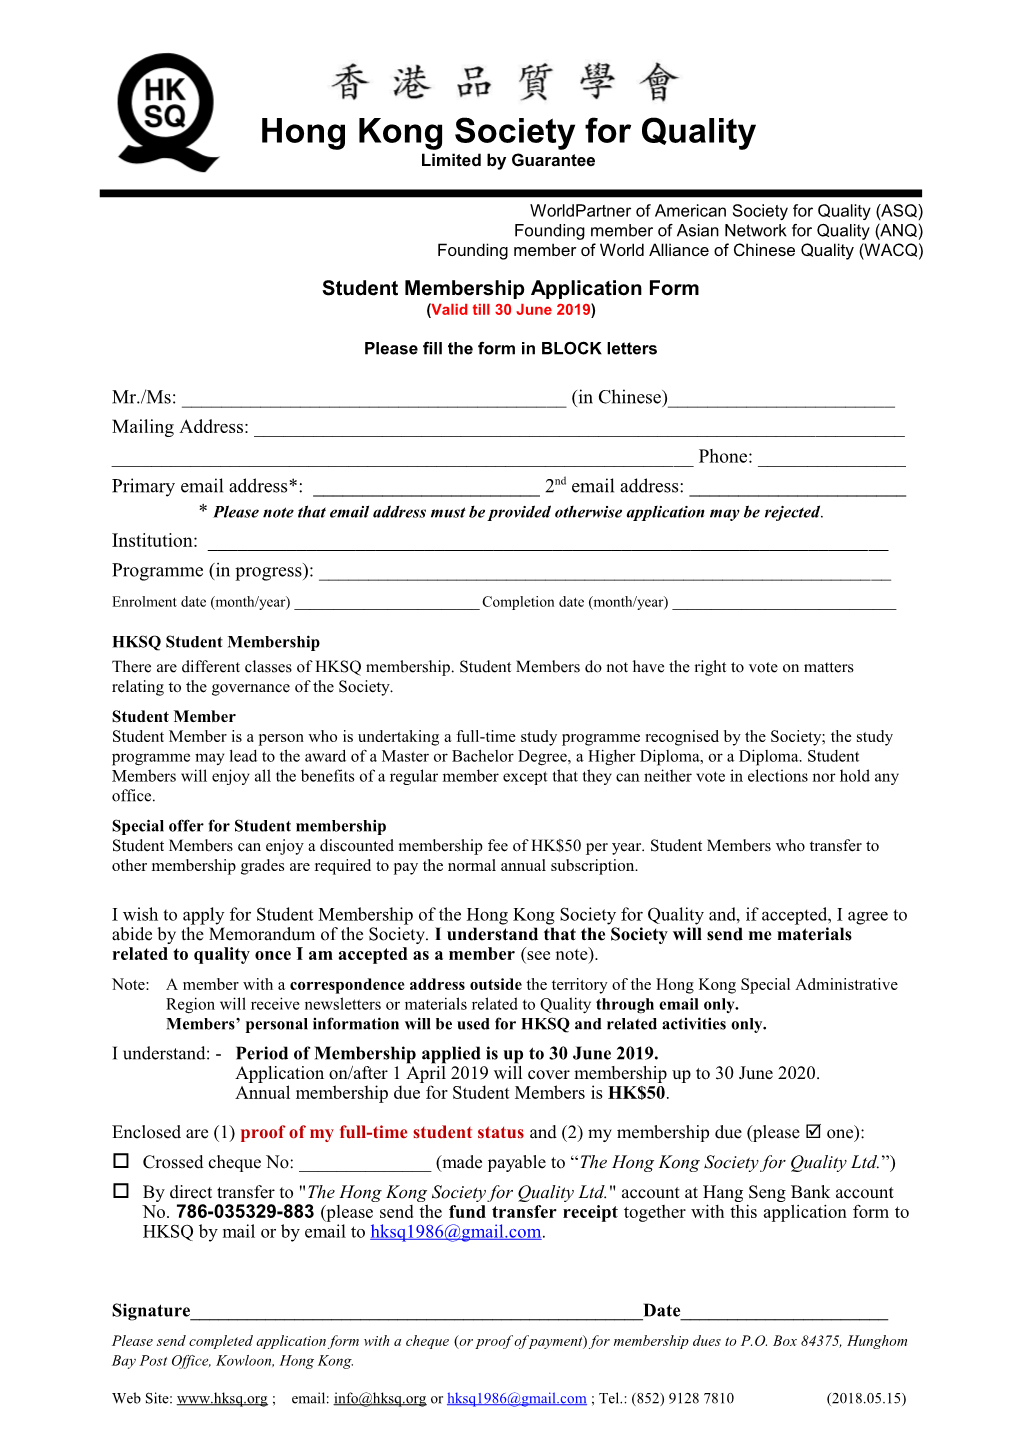 HKSQ Appication Form, 2006.02